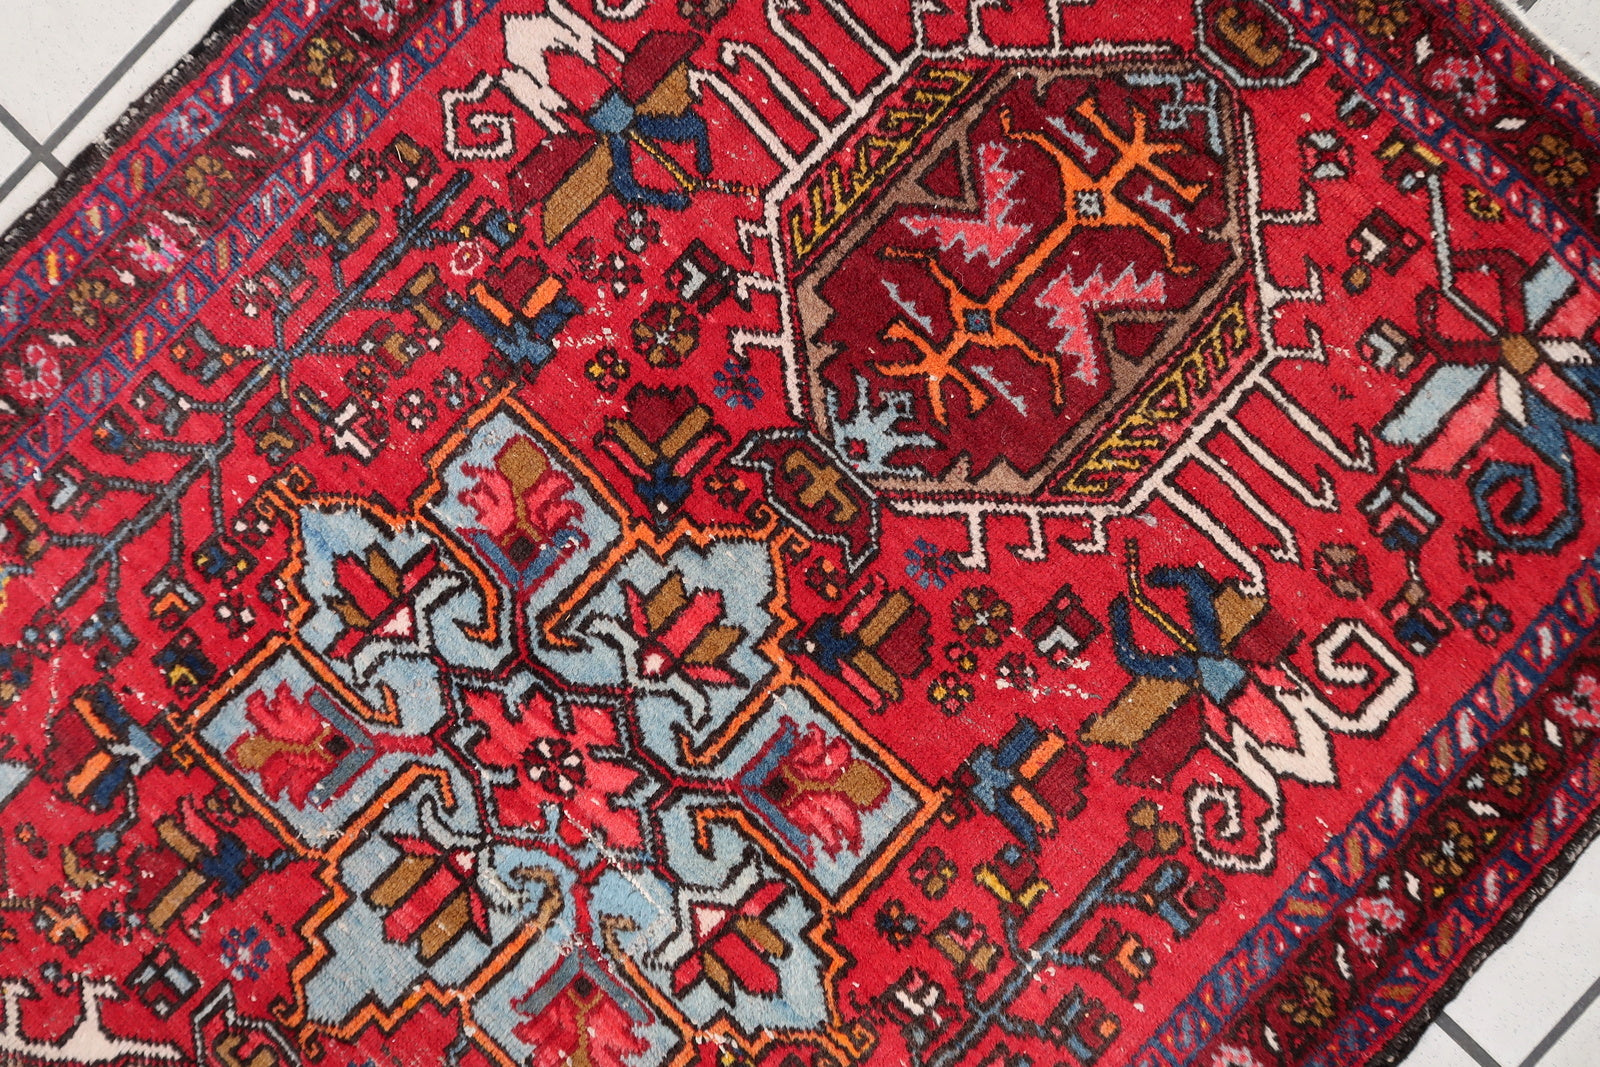 Soft Feel Underfoot Provided by Wool Material on Antique Persian Karajeh Rug - 1920s